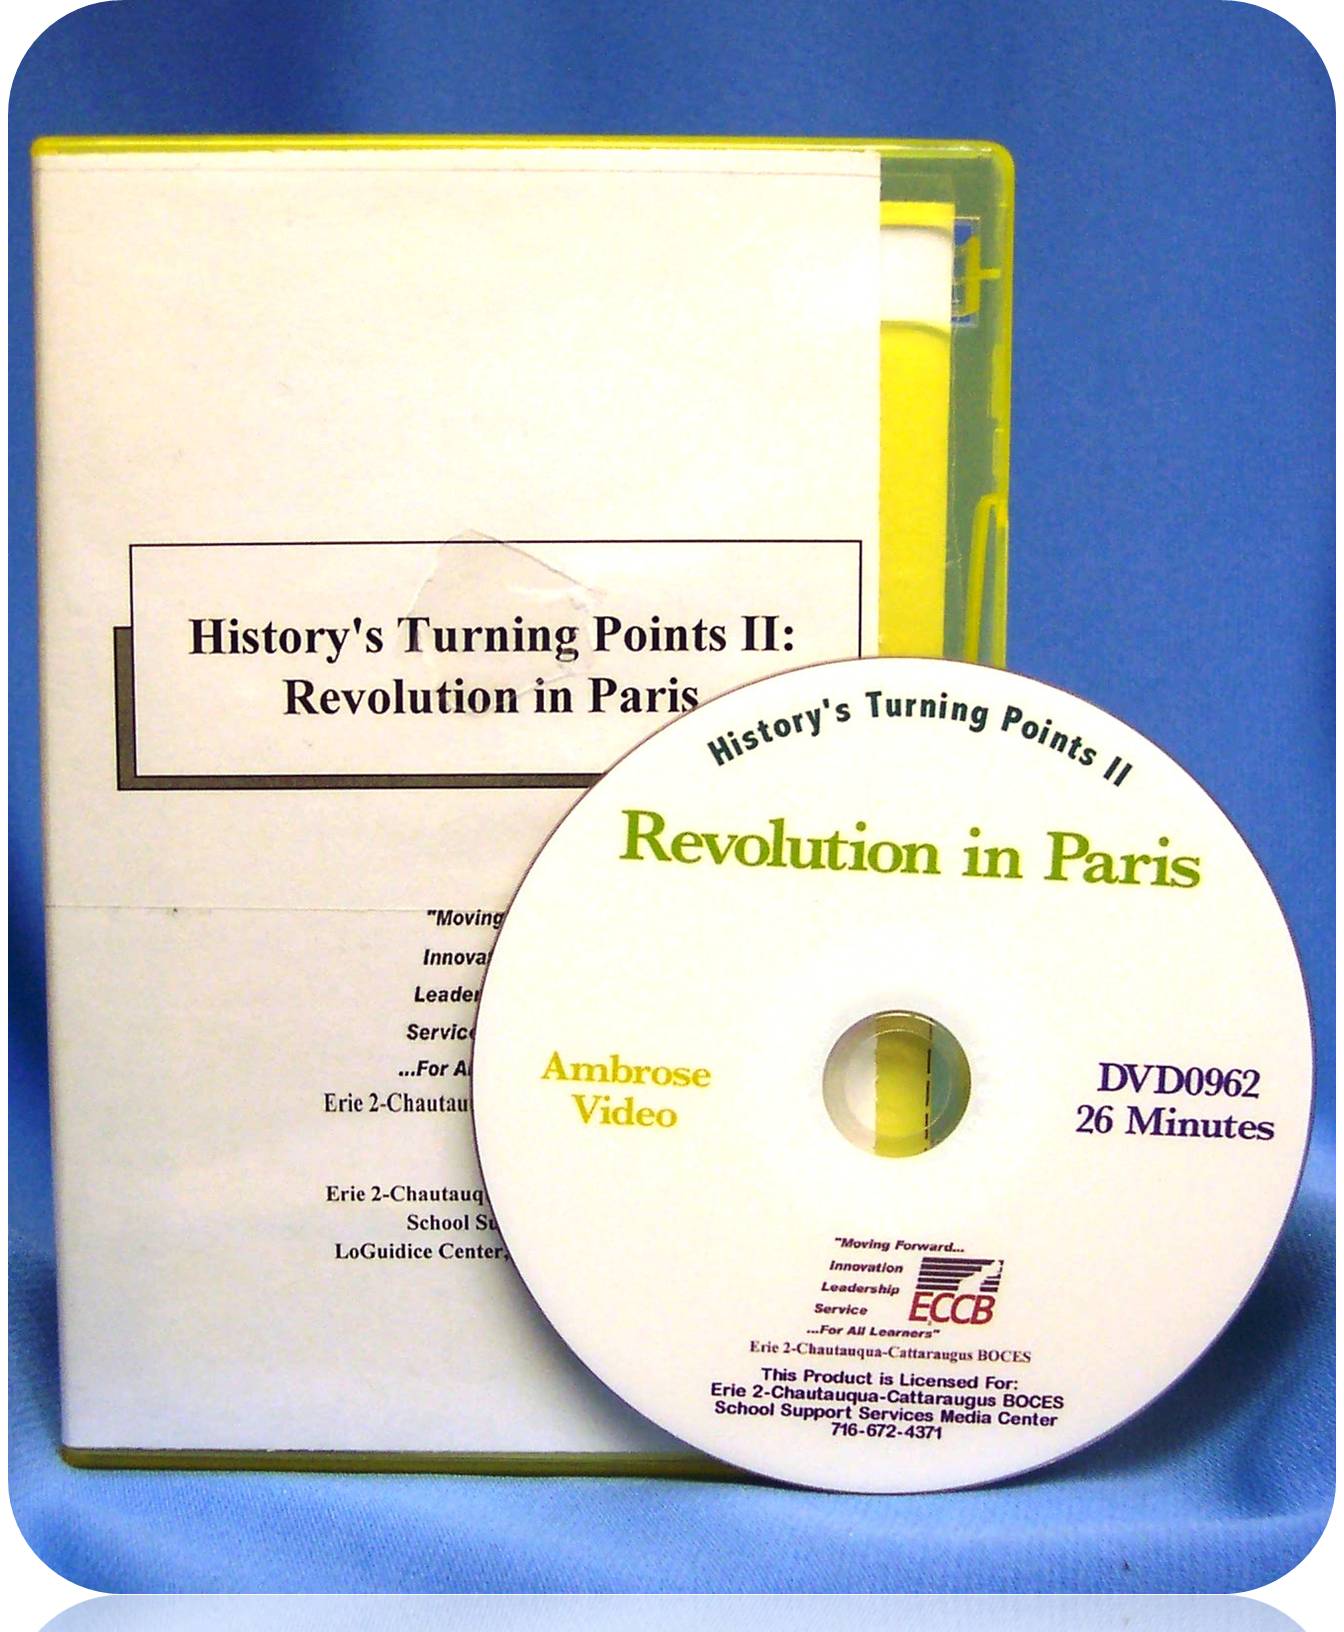 History's Turning Points II: Revolution in Paris